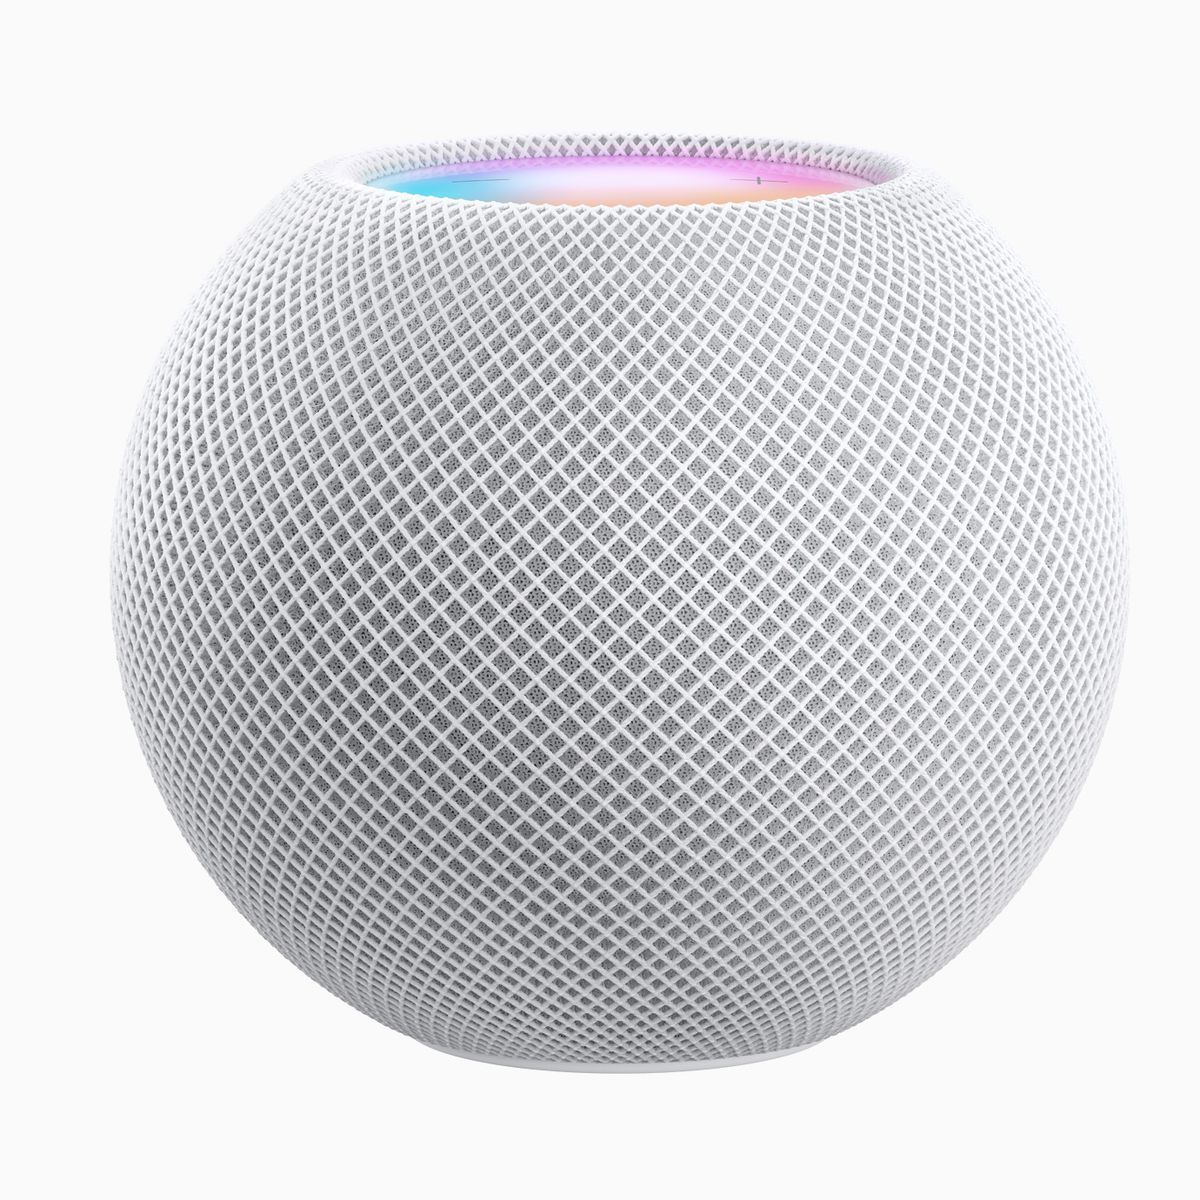 Apple Announces HomePod mini With Spherical Design and S5 